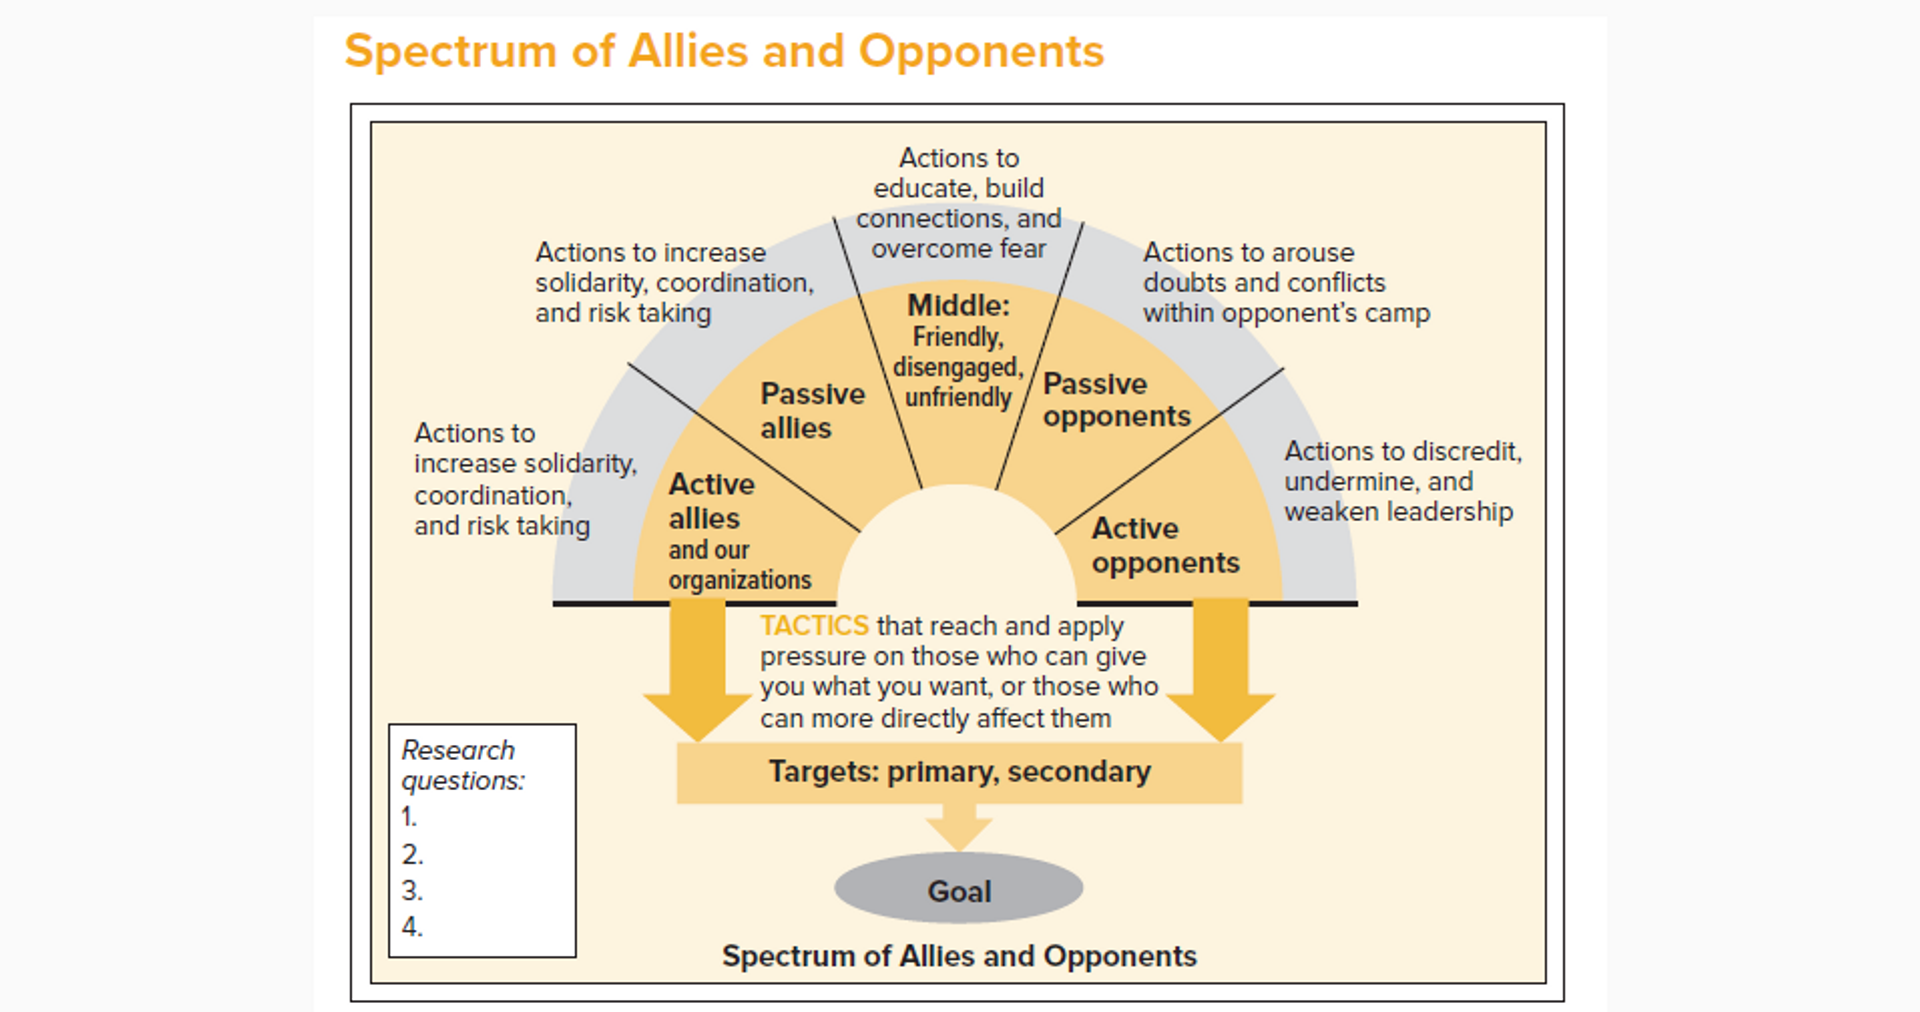 DAI presentation chart outlining 'spectrum of allies and opponents' to achieve change through protest.  - Sputnik International, 1920, 19.11.2022